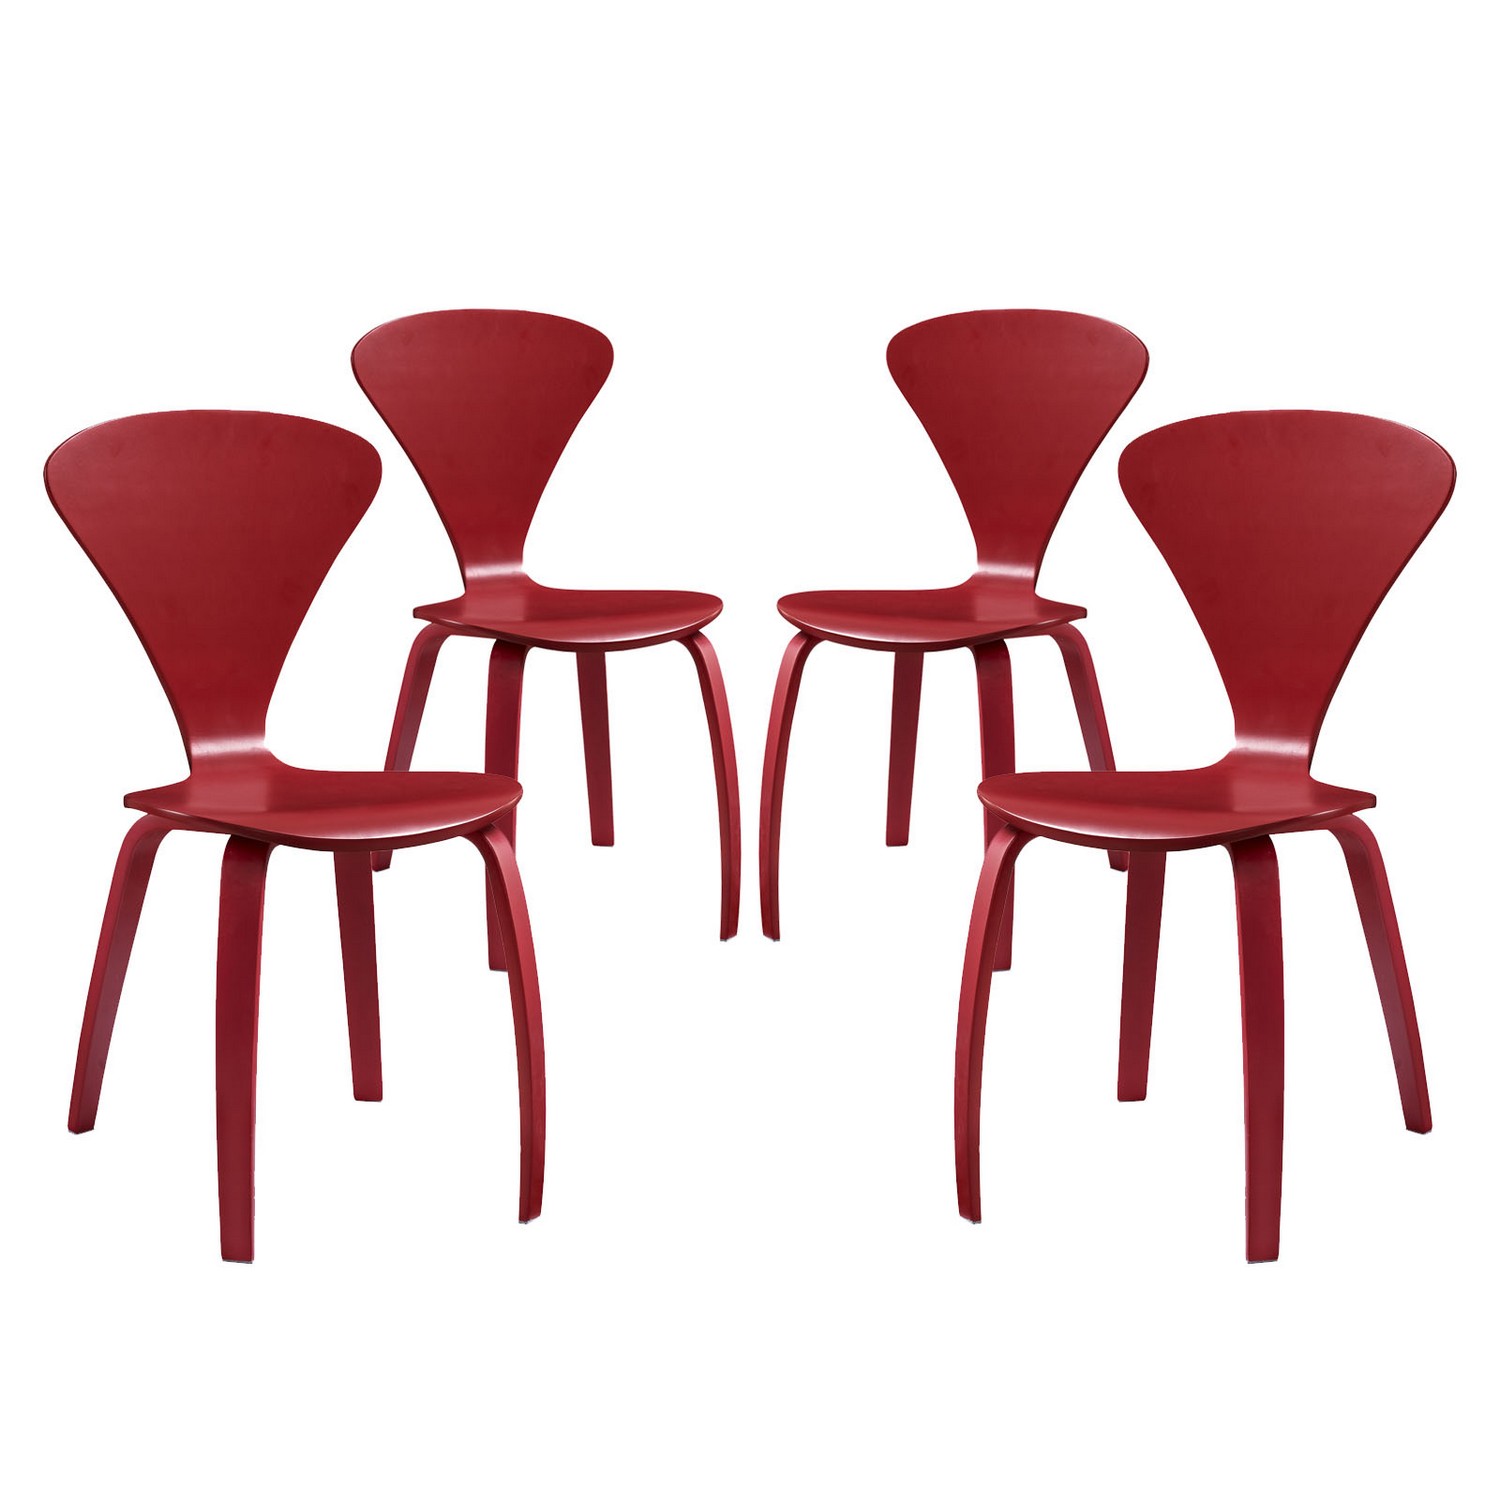 Modway Vortex Dining Chairs Set of 4 - Red